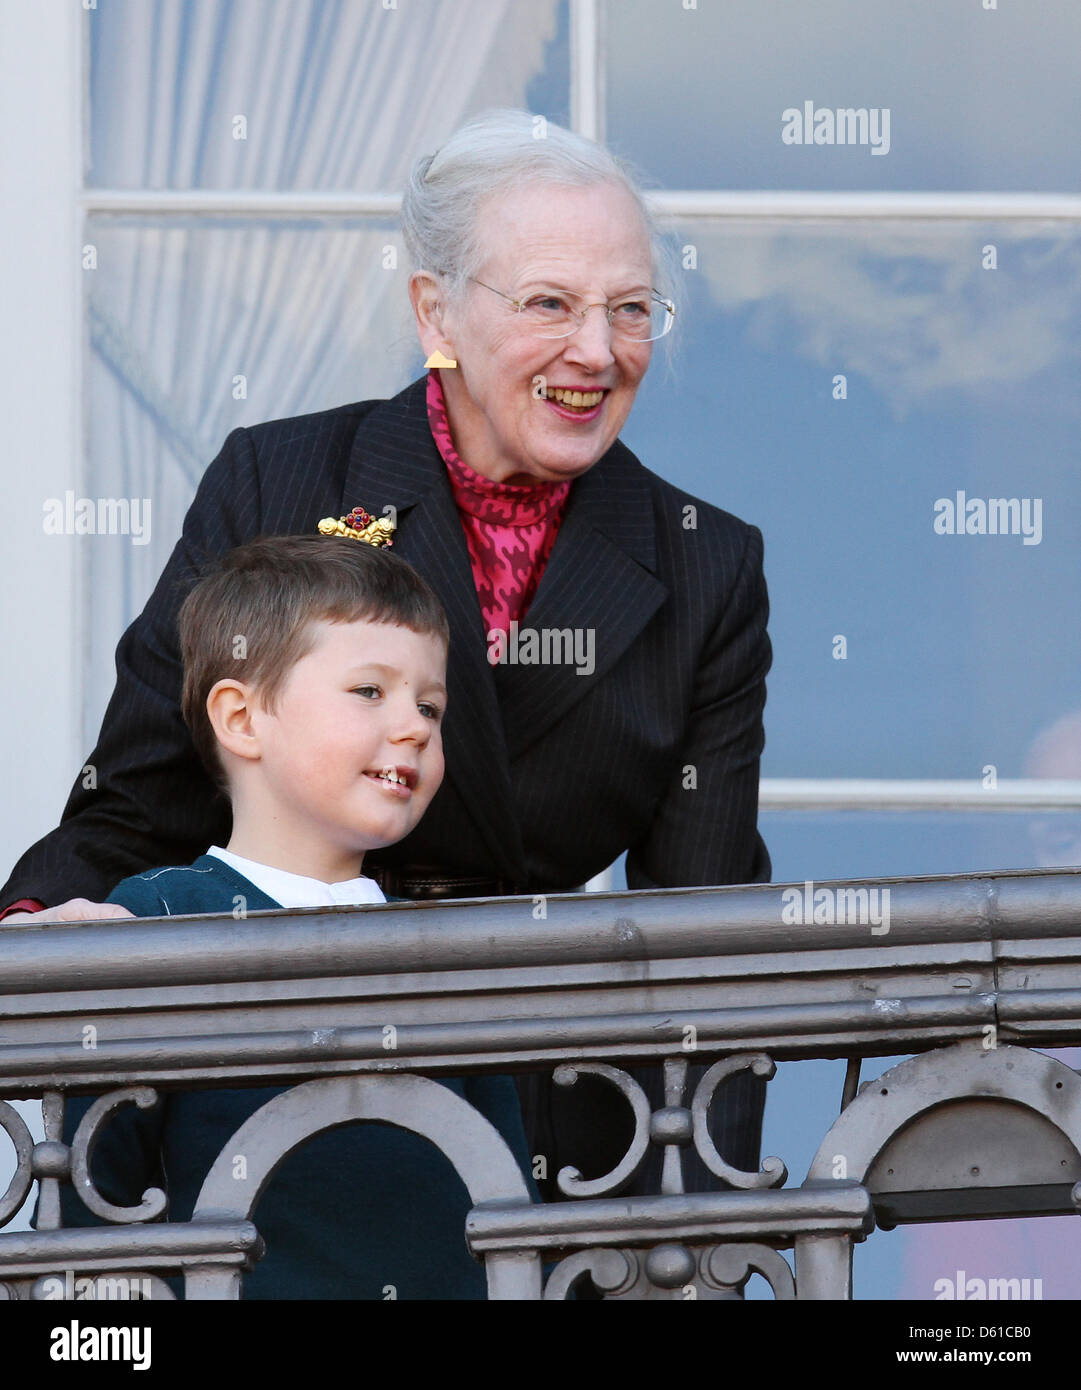 danish-queen-margrethe-and-prince-christian-stand-on-the-balcony-of-D61CB0.jpg